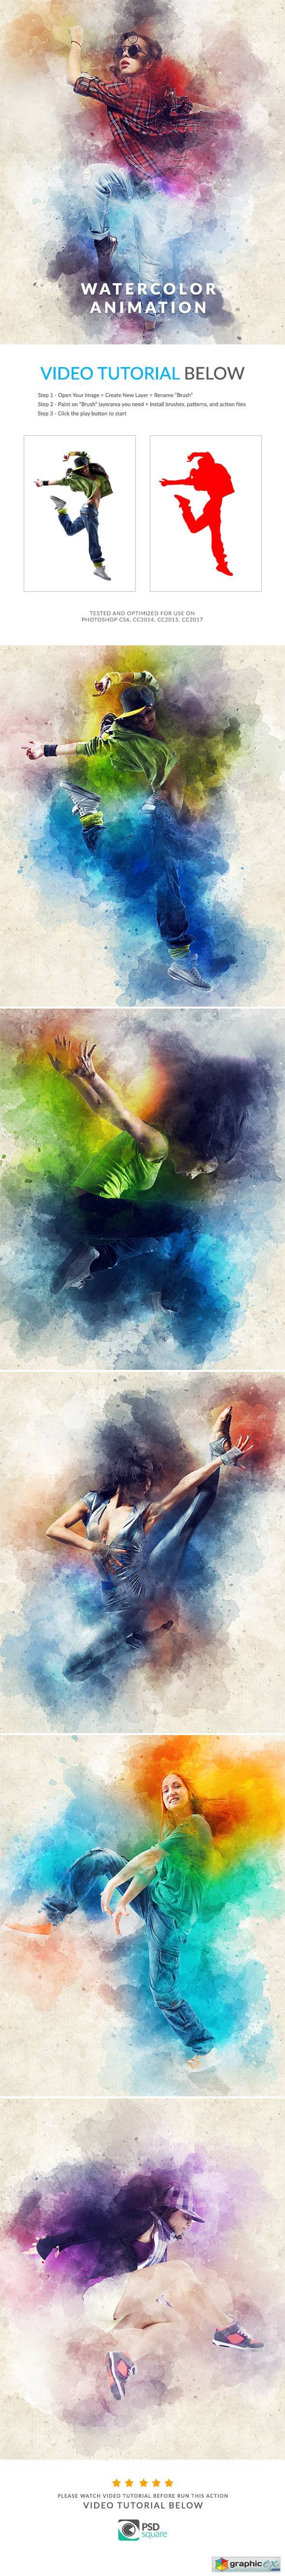 Graphicriver Watercolor Animation Photoshop Action